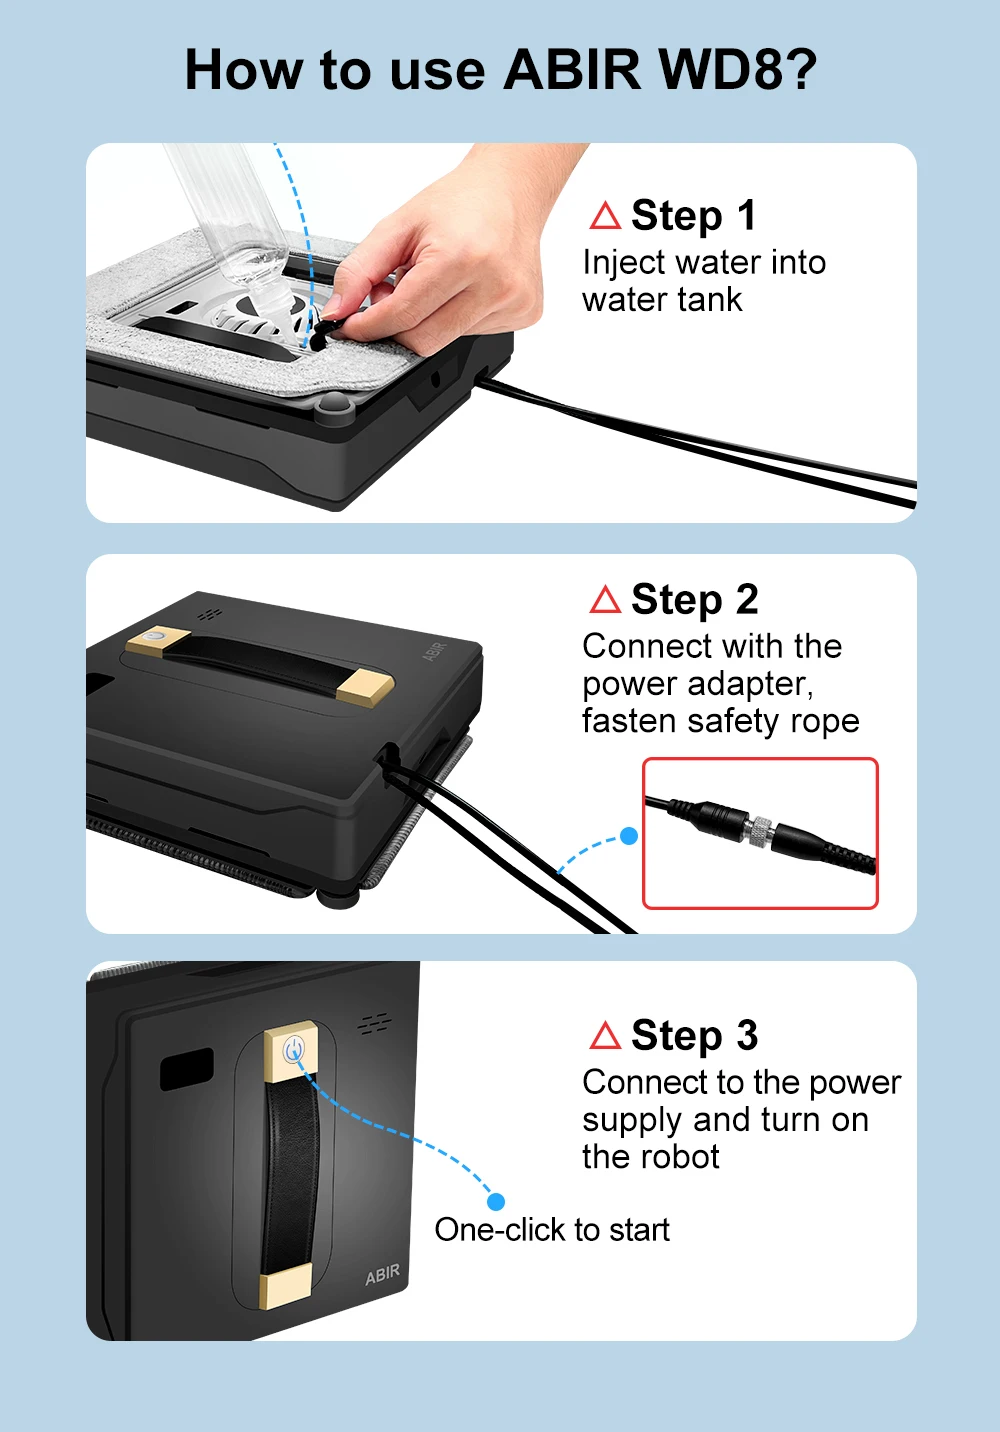 How to use ABR WD8? Step 1 Inject water into water tank. Step 2 Connect with the power adapter, fasten safety rope. Step 3 Connect to the power supply and tum on the robot (One-click to Start)